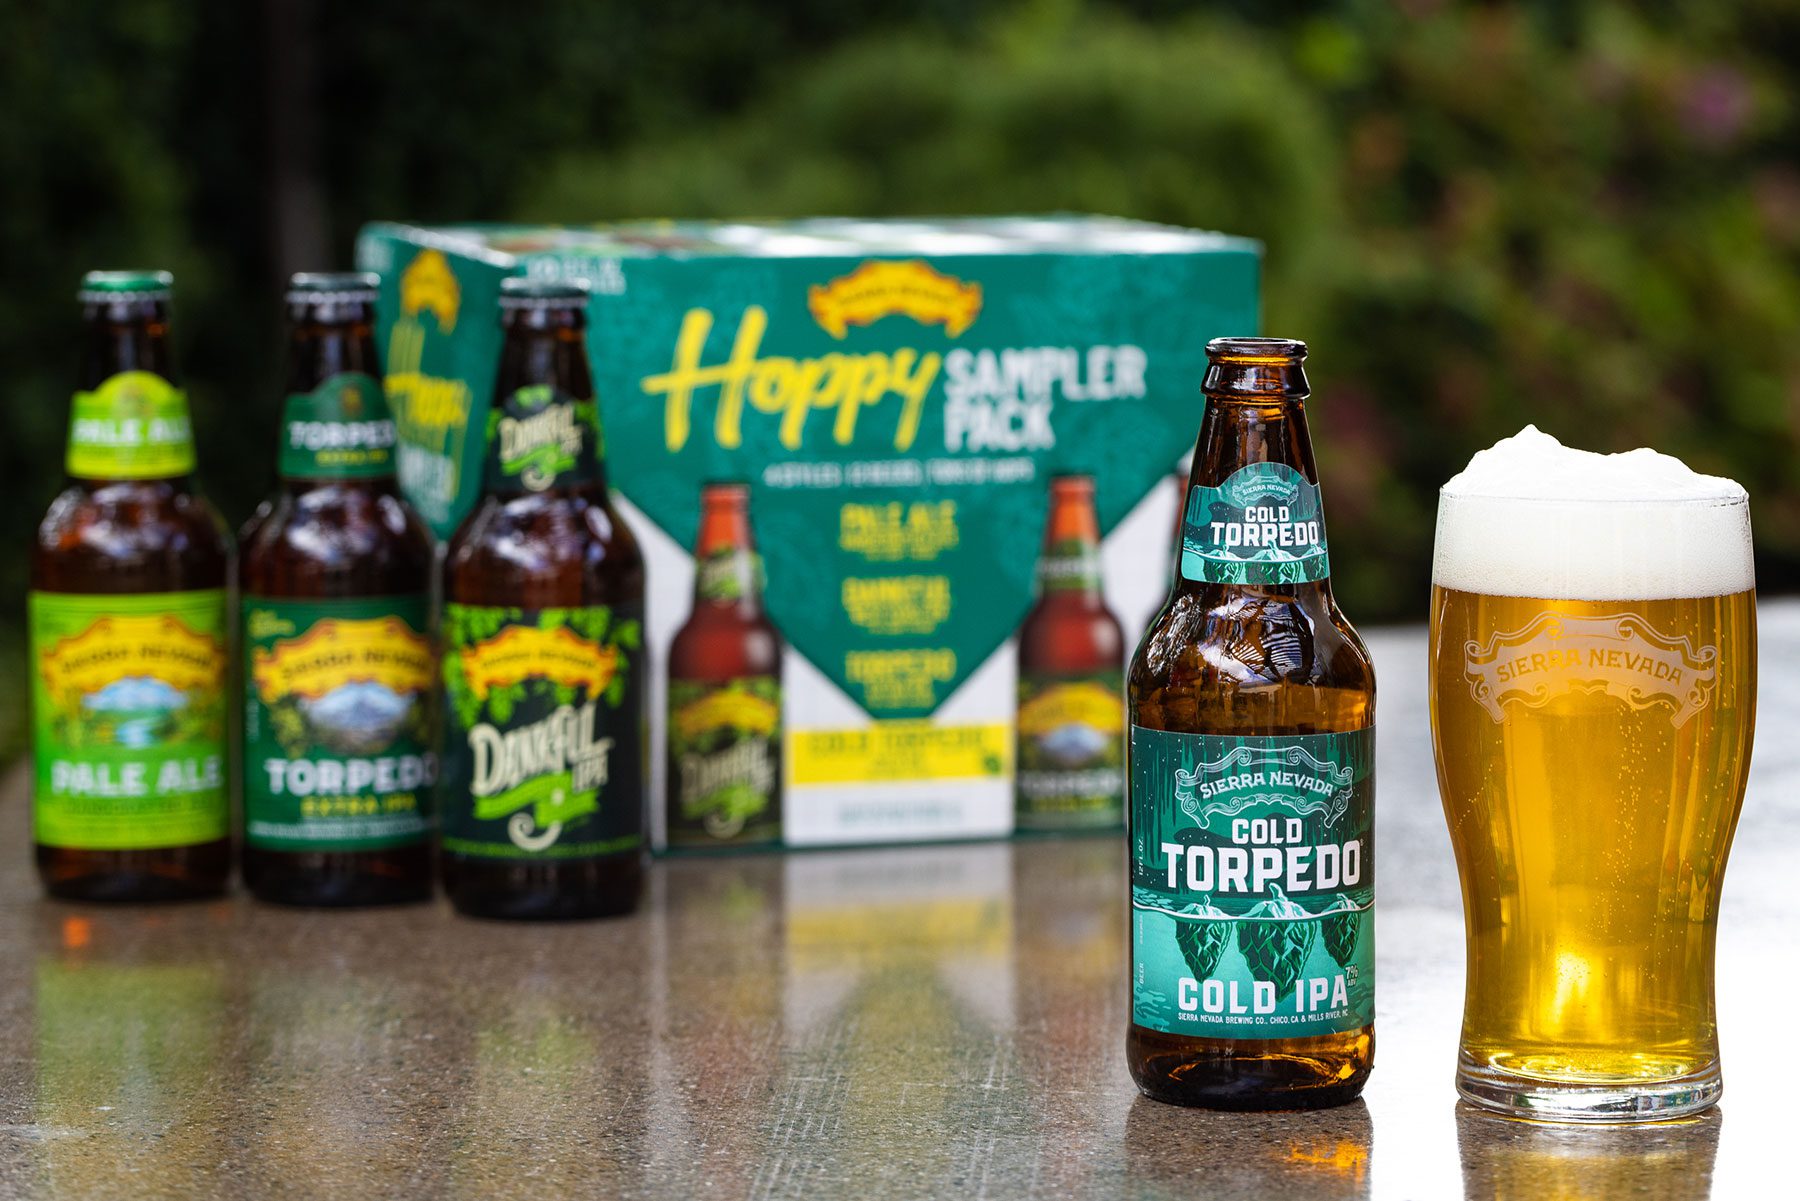 Sierra Nevada Cold Torpedo in front of the Hoppy Sampler mixed pack